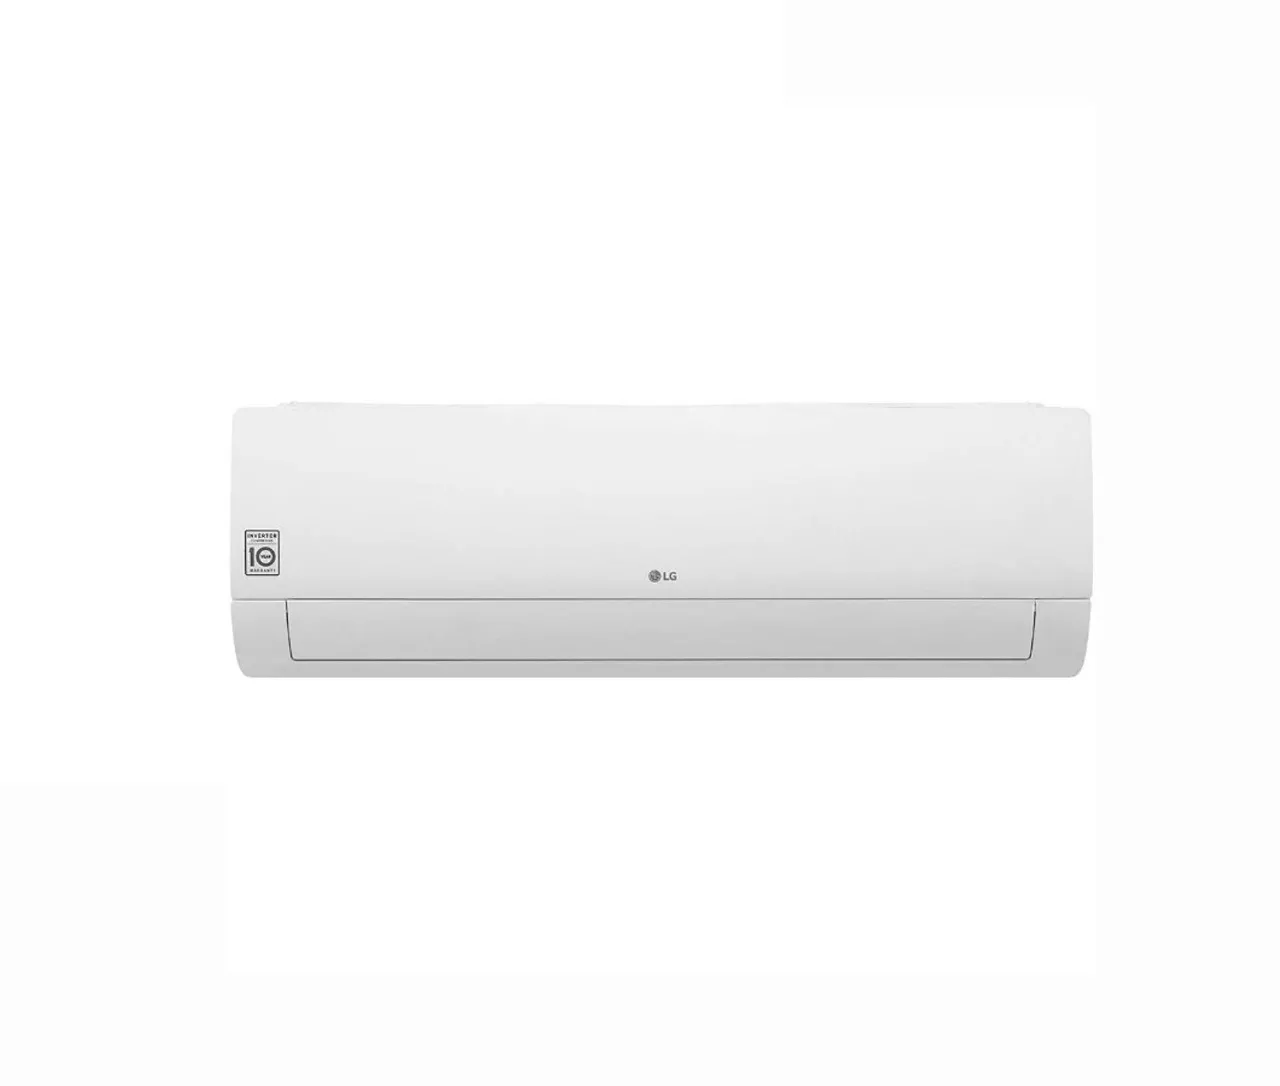 LG 1 Ton Split Air Conditioner Energy Saving Faster Cooling Rotary Compressor 12000 BTU Color White Model – S4NH12TZCAA – 1 Year Full 10 Years Compressor Warranty.